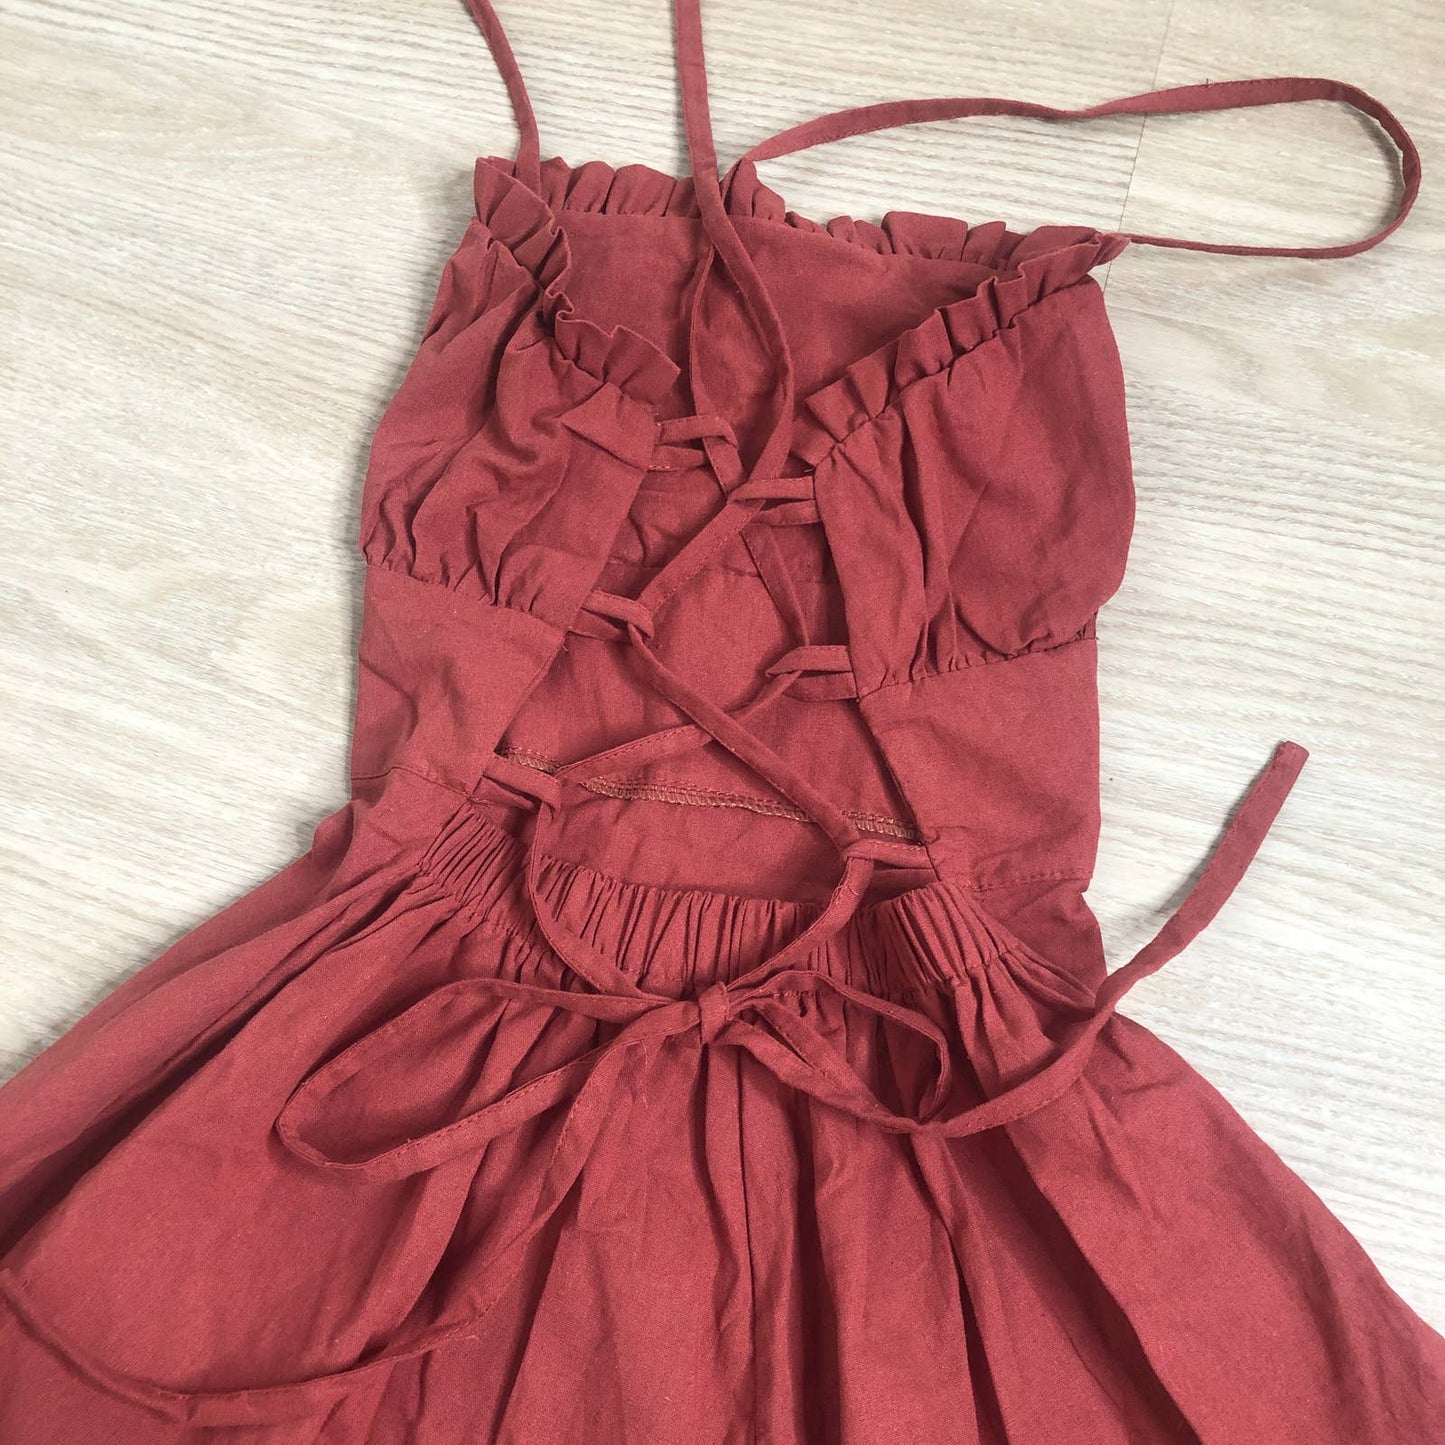 NWOT red rust bustier lace up backless fit and flare strappy mini dress